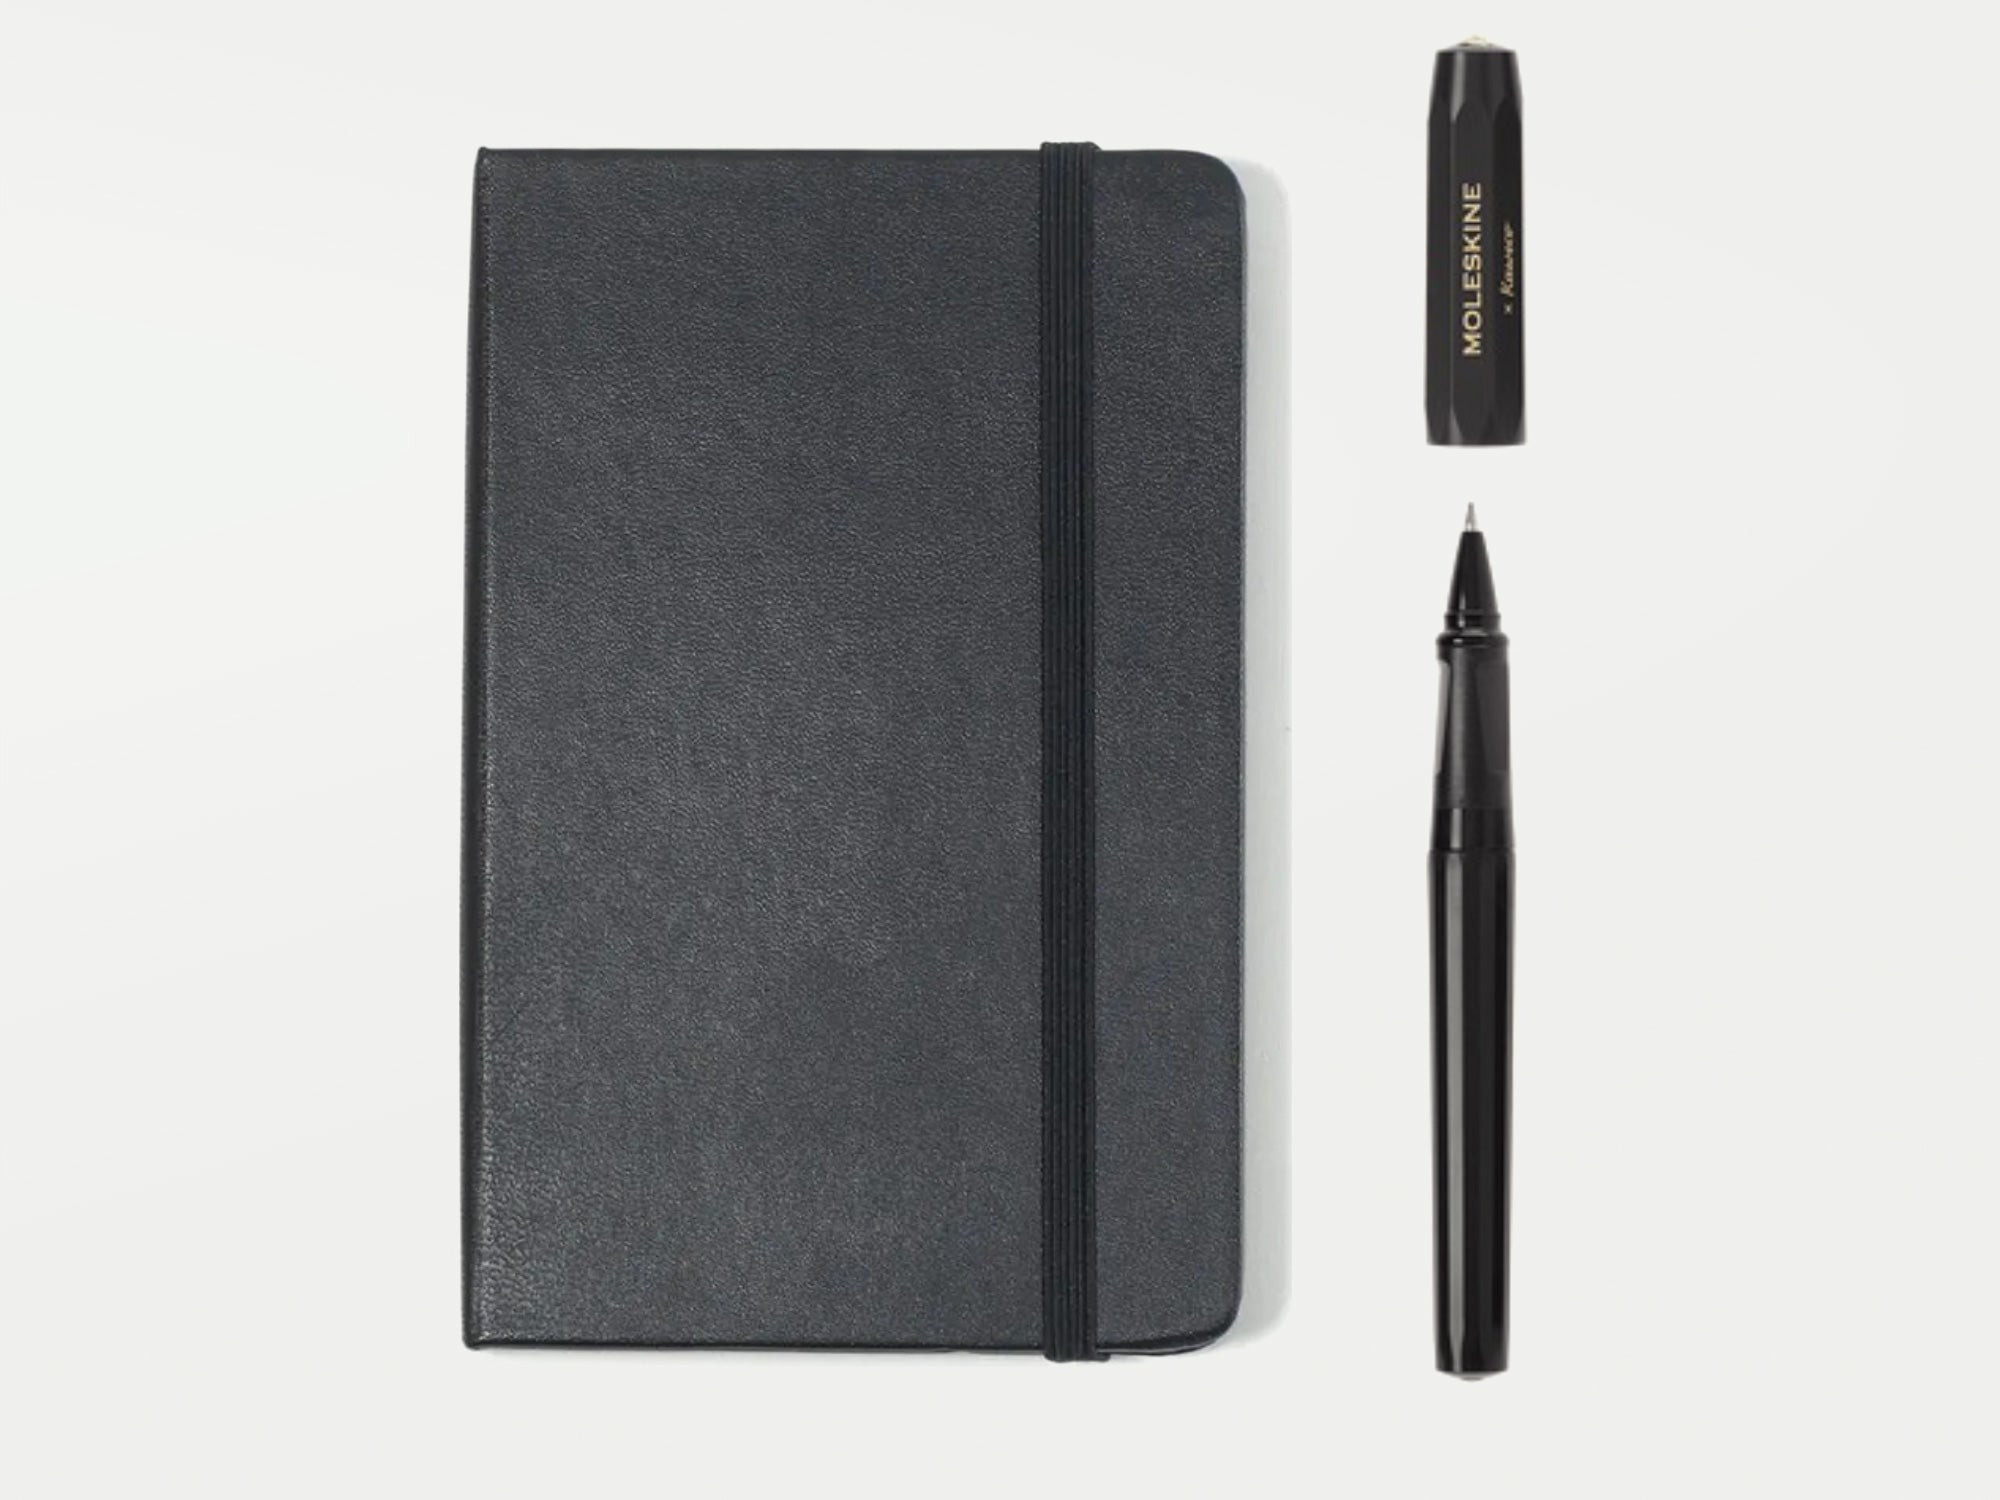 Moleskine x Kaweco Ruled Notebook and Rollerball Pen Set